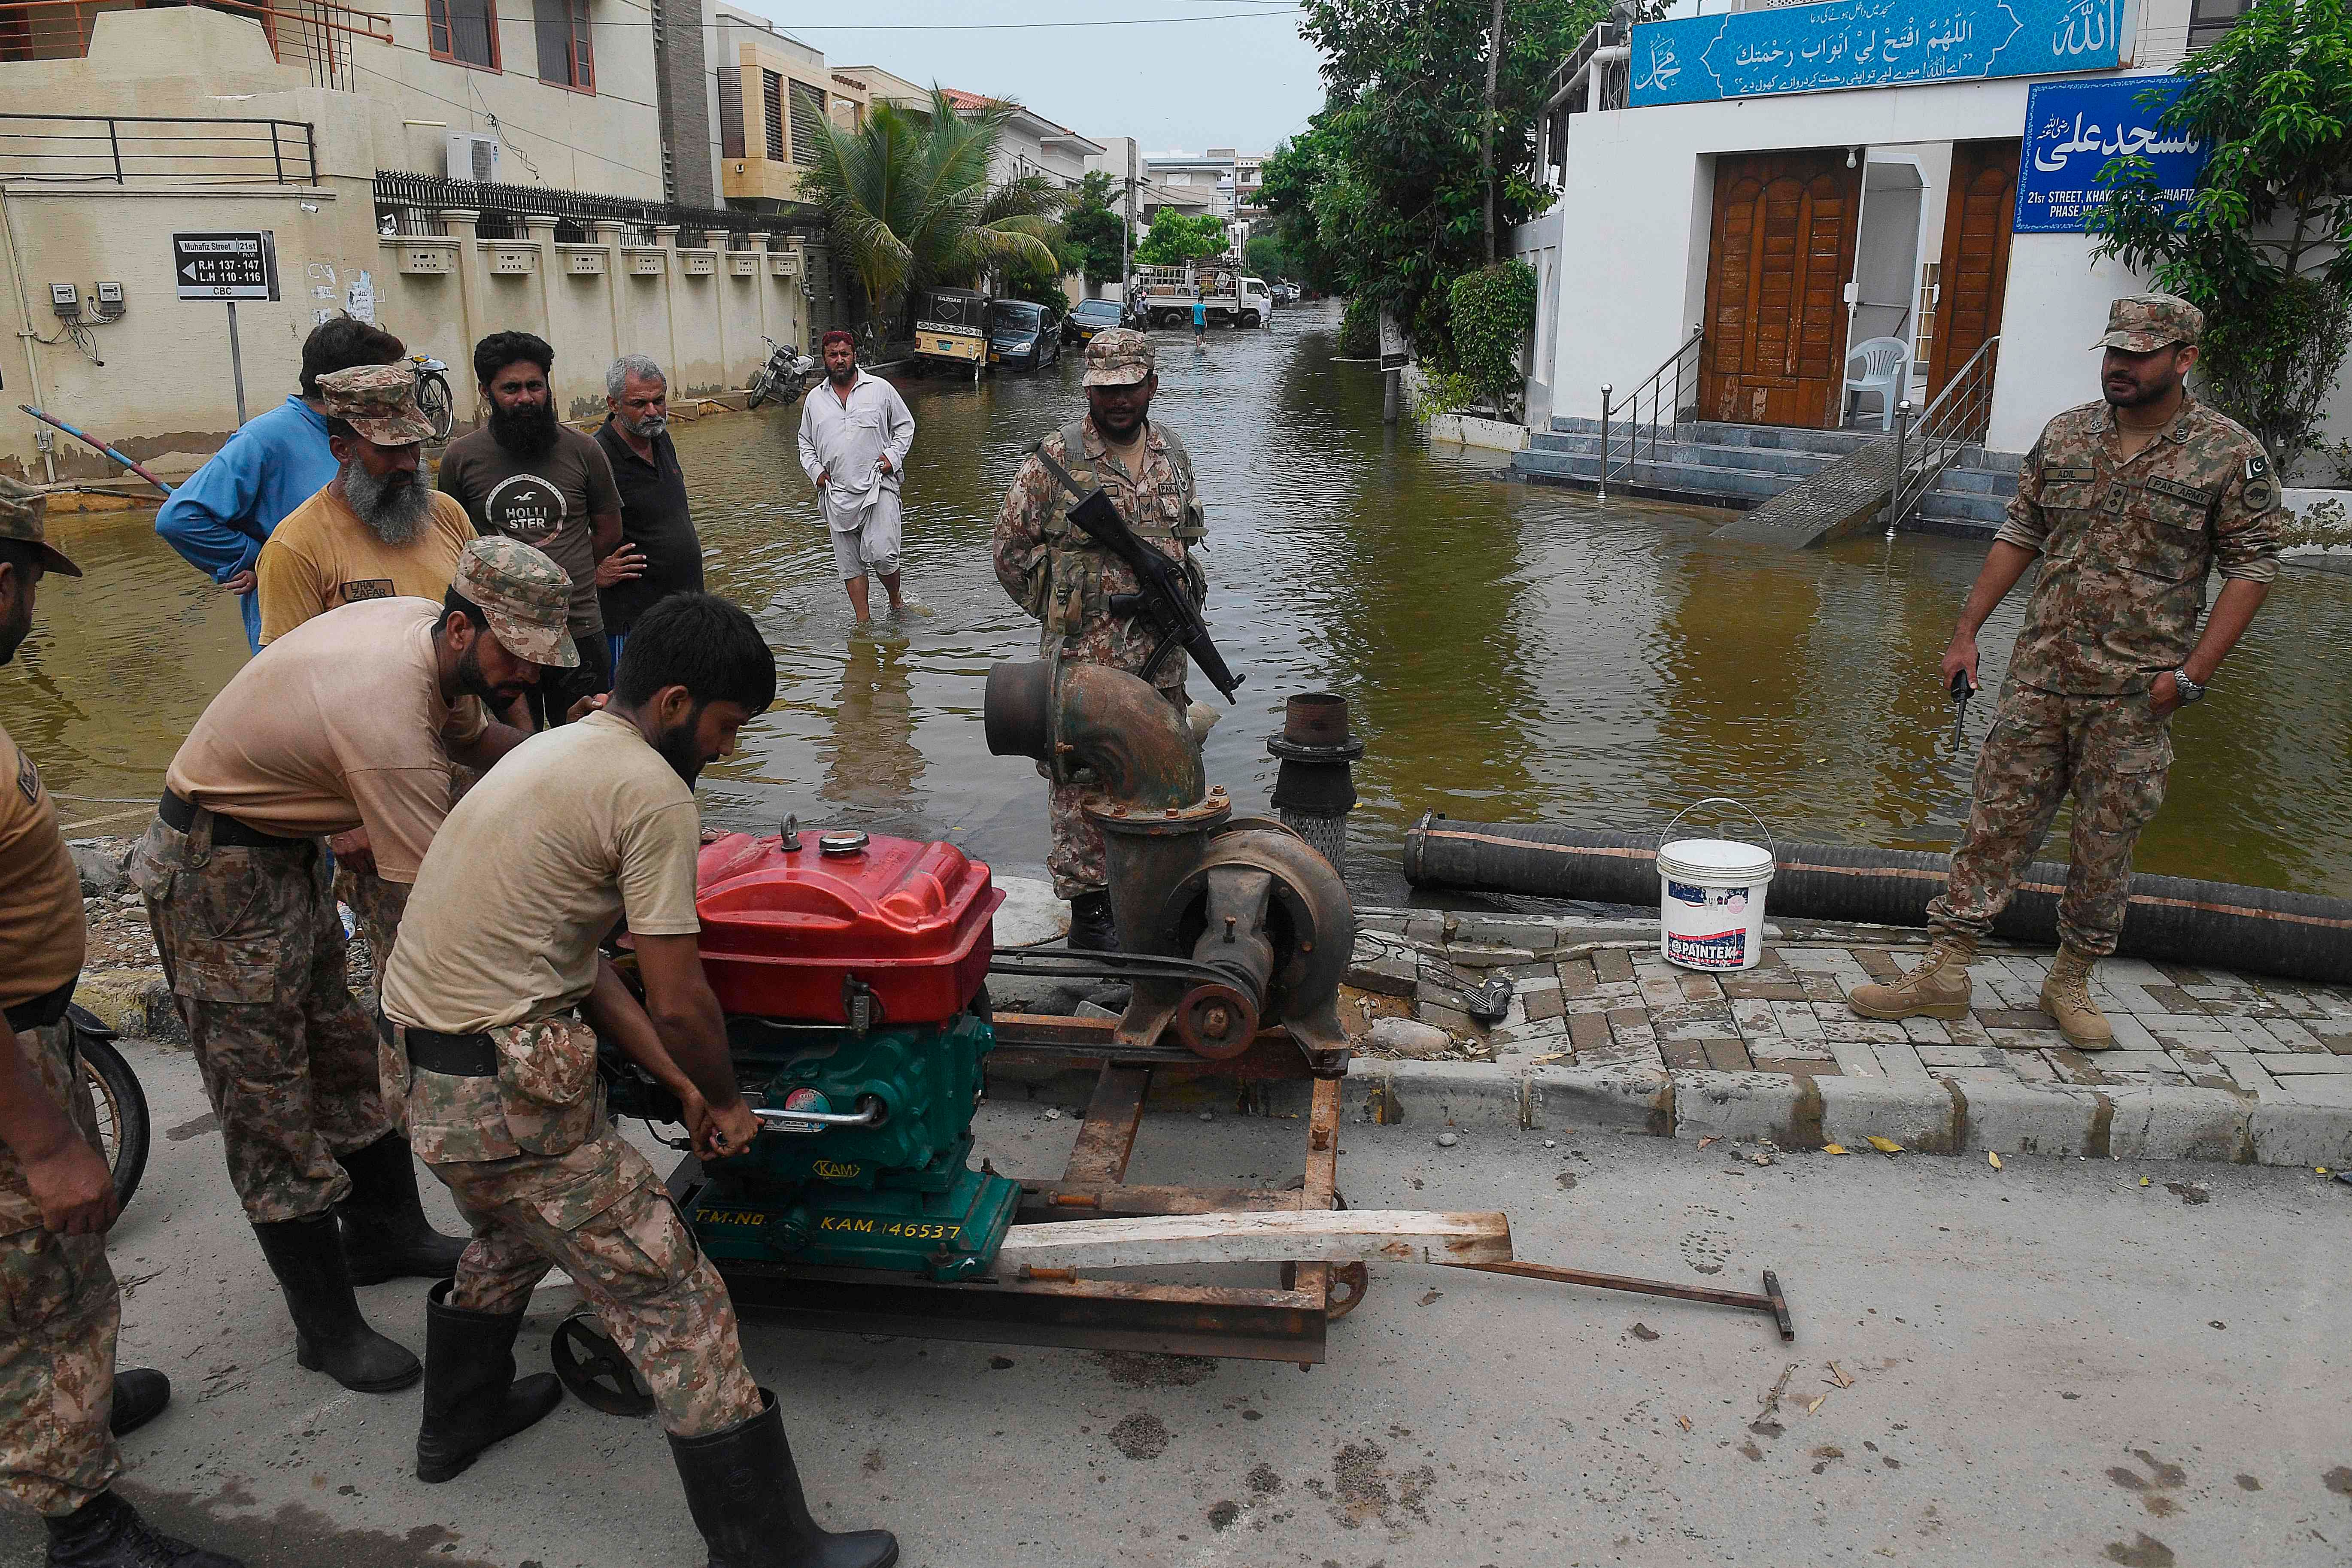 Troops install a water pump to remove water from a flooded residential area following heavy monsoon rains triggered floods in Pakistan's port city of Karachi on August 31, 2020. - Karachi residents began cleaning ruined homes and businesses on August 31 after catastrophic flooding sent rivers of filthy water cascading through Pakistan's largest city, while deadly monsoon weather continued to lash communities across South Asia. Credit: AFP